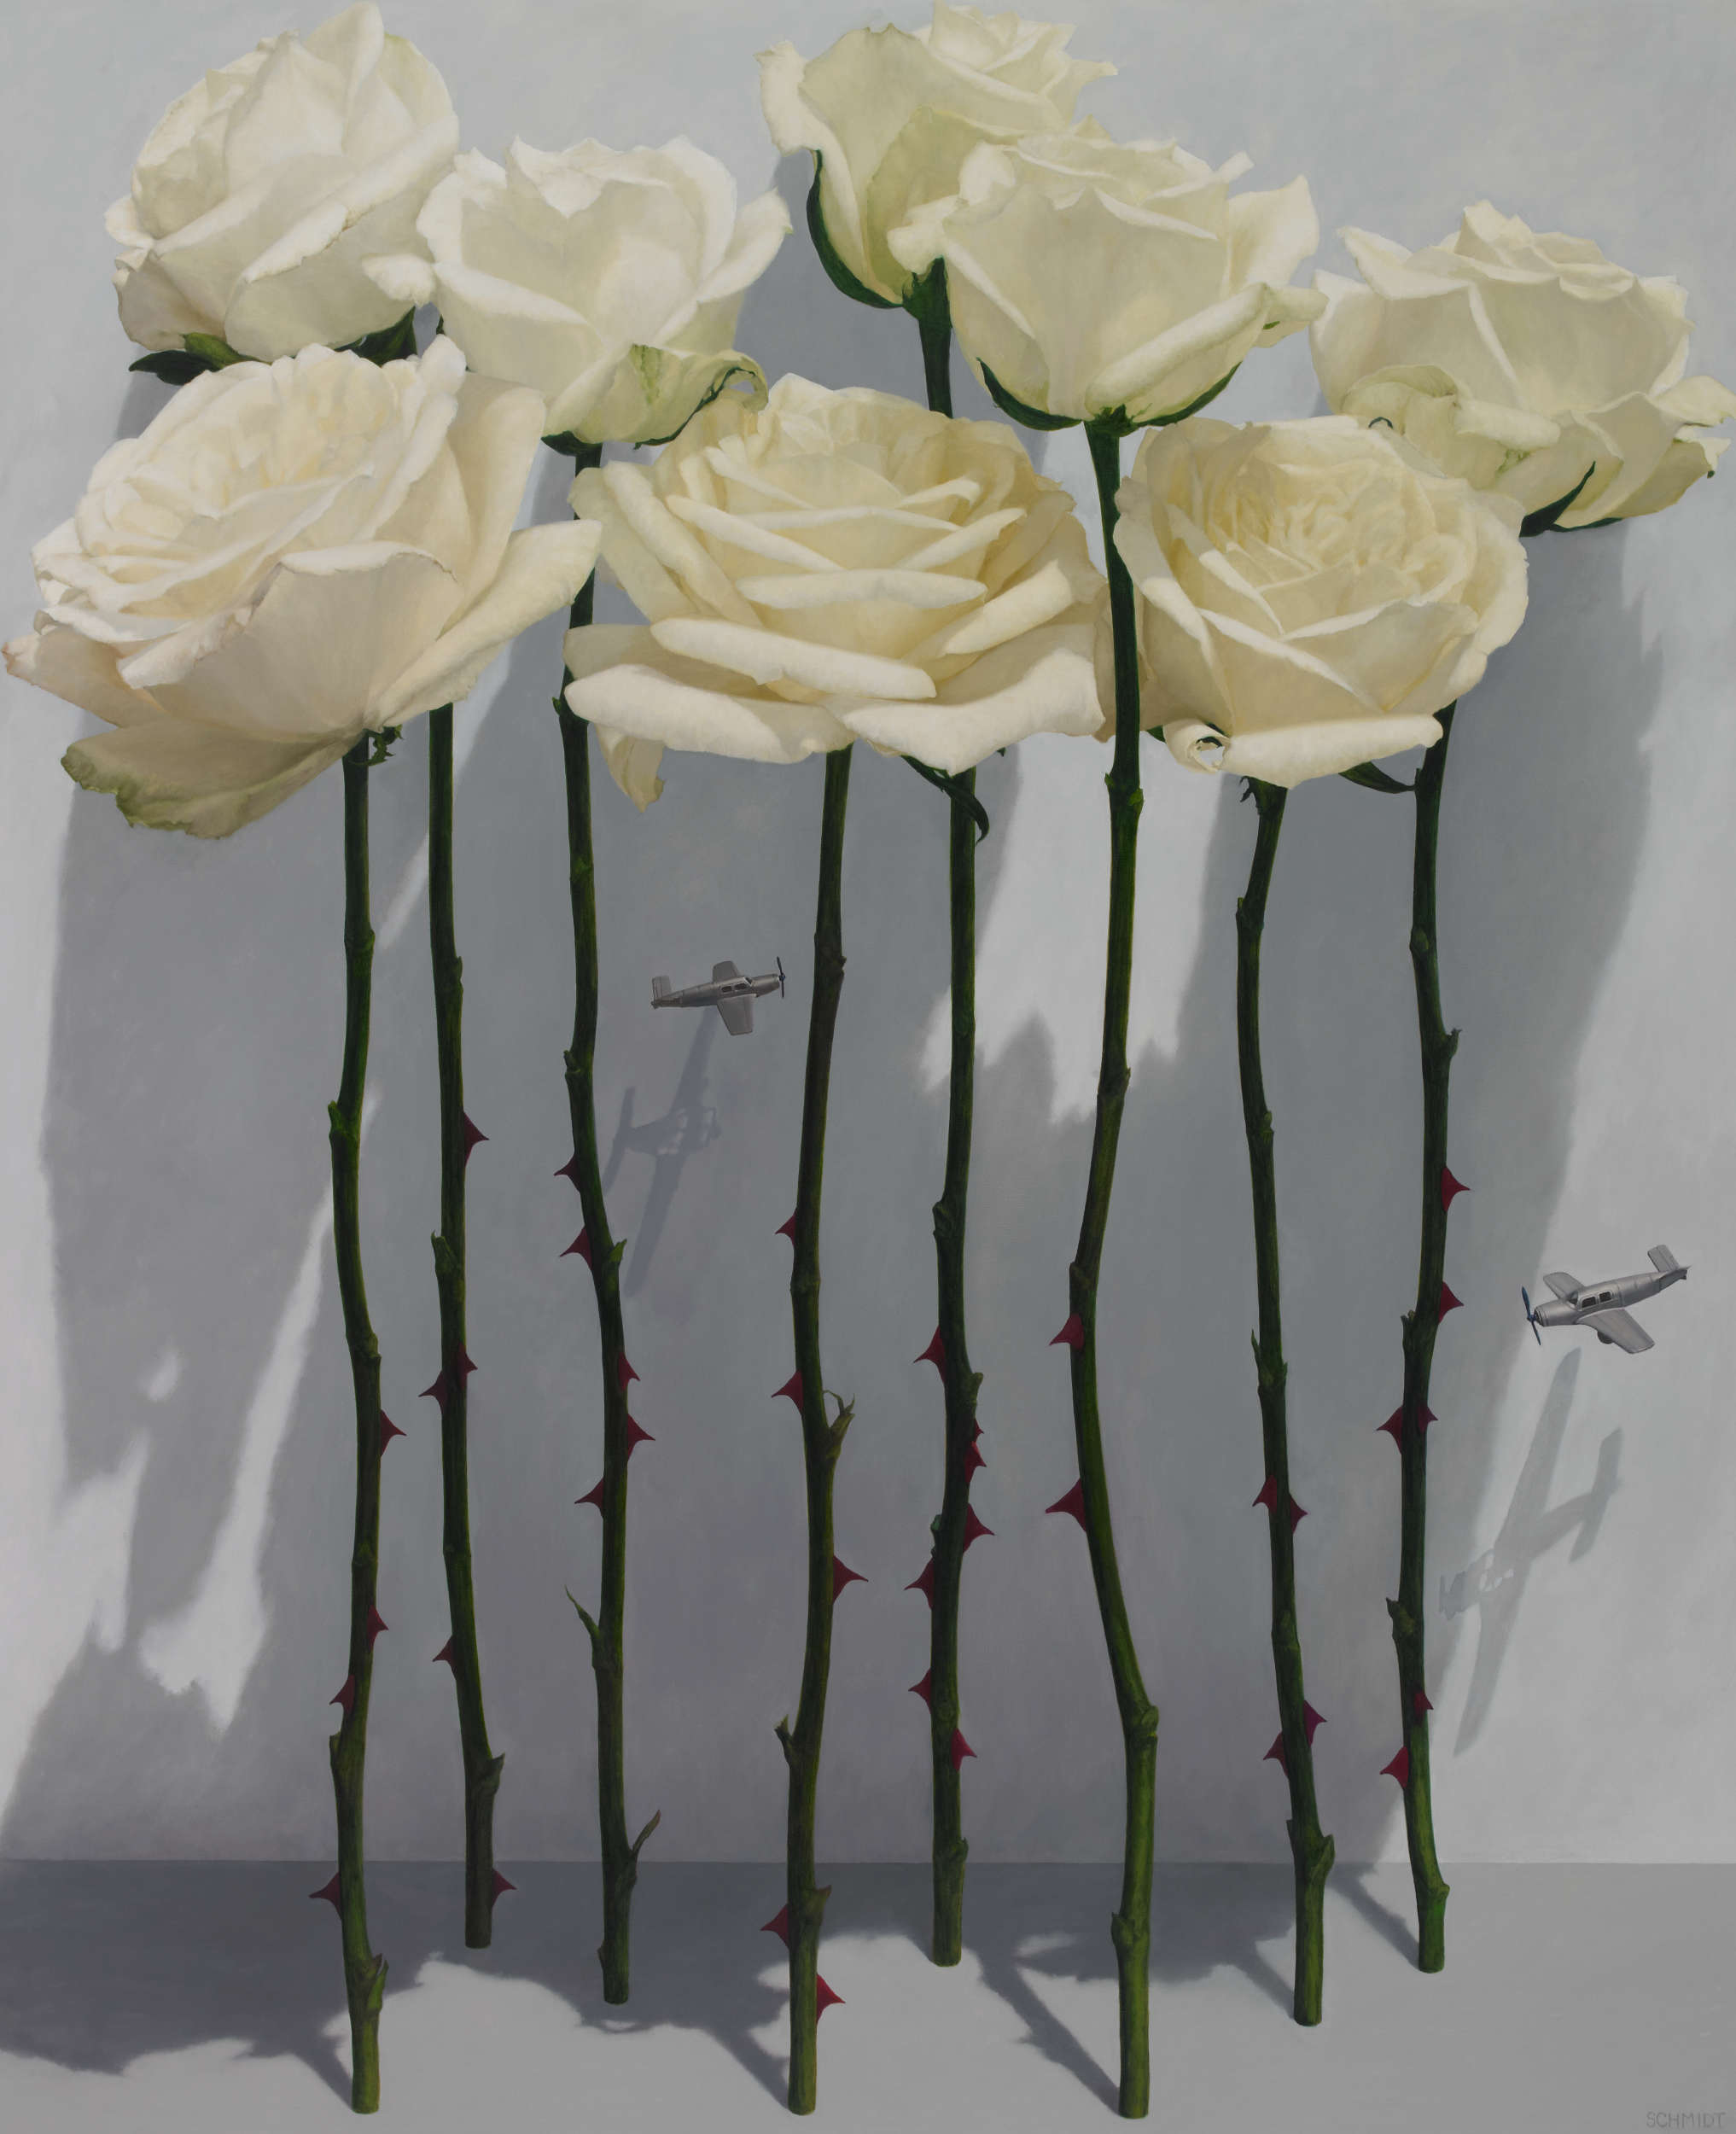 8 white roses standing, stems and thorns, light gray wall with shadows, 2 tiny airplanes flying